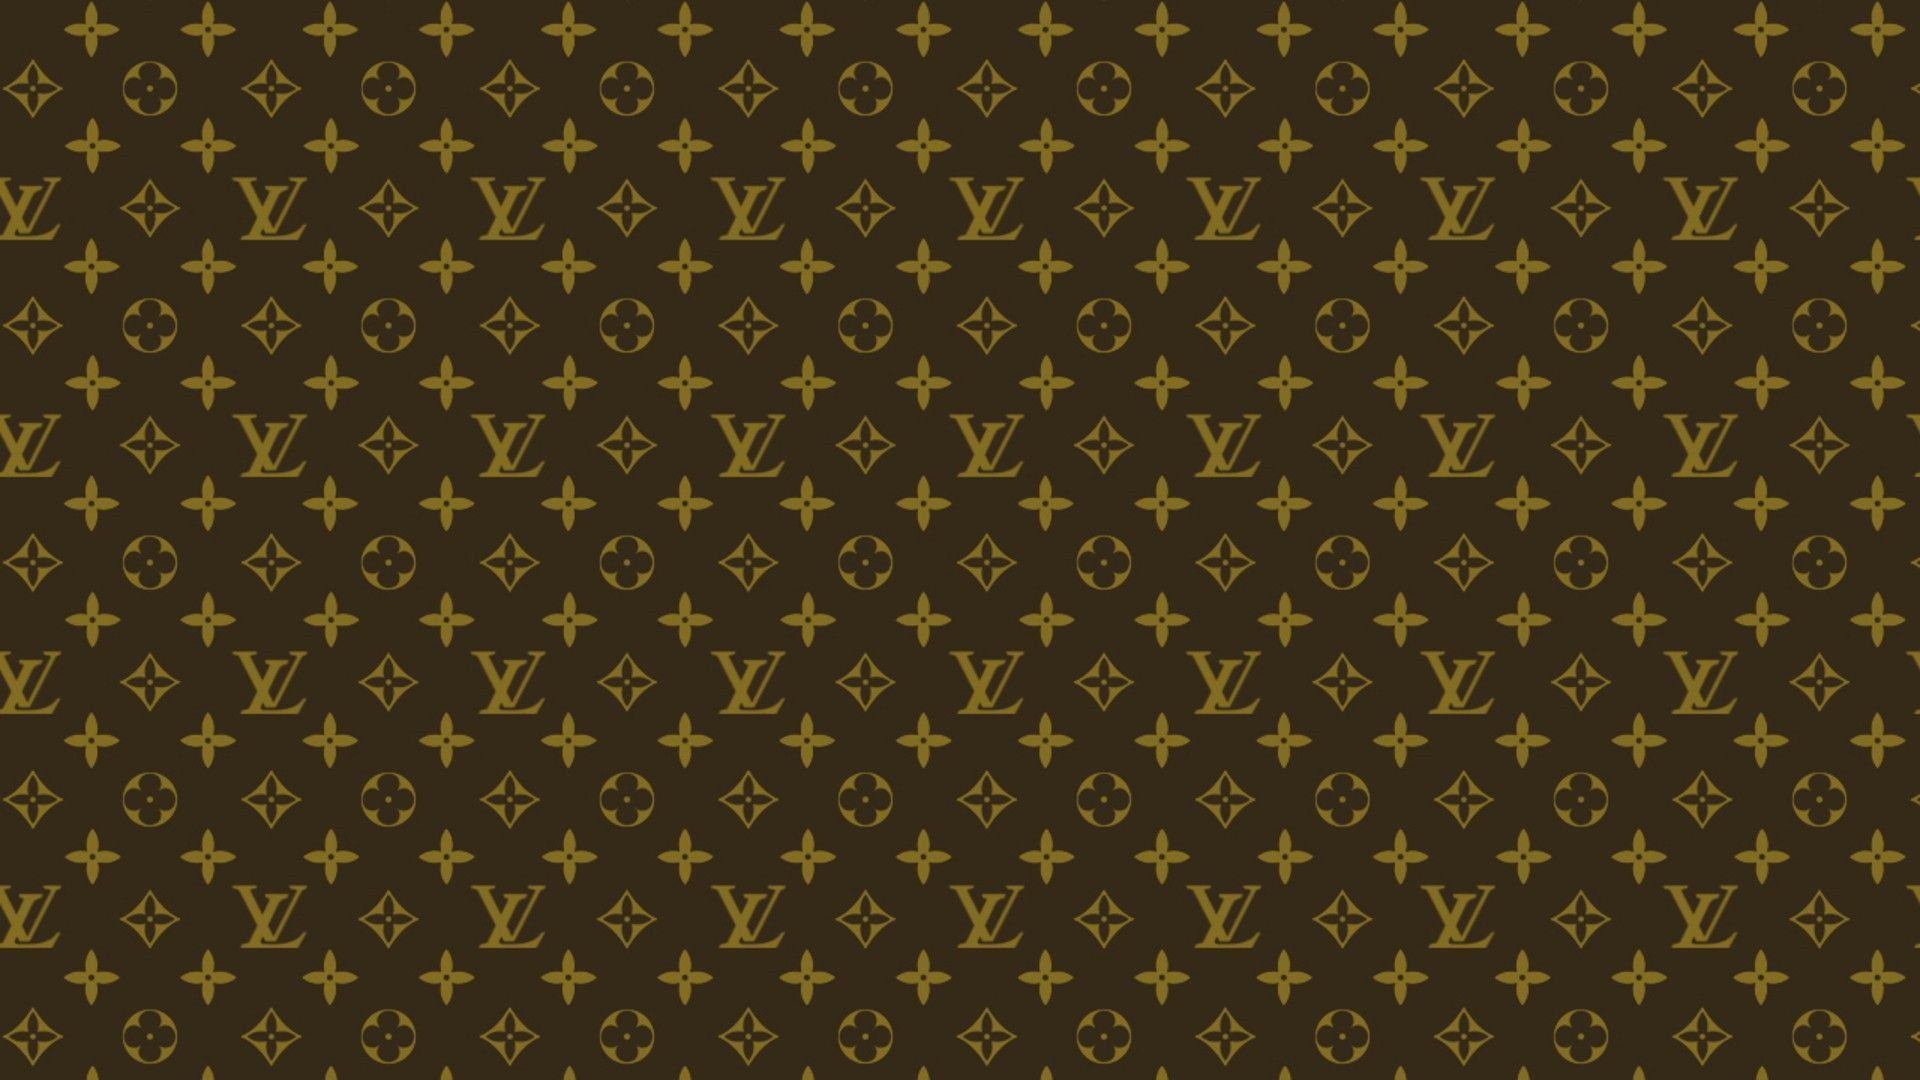 LV Louis Vuitton HD Wallpaper APK for Android Download